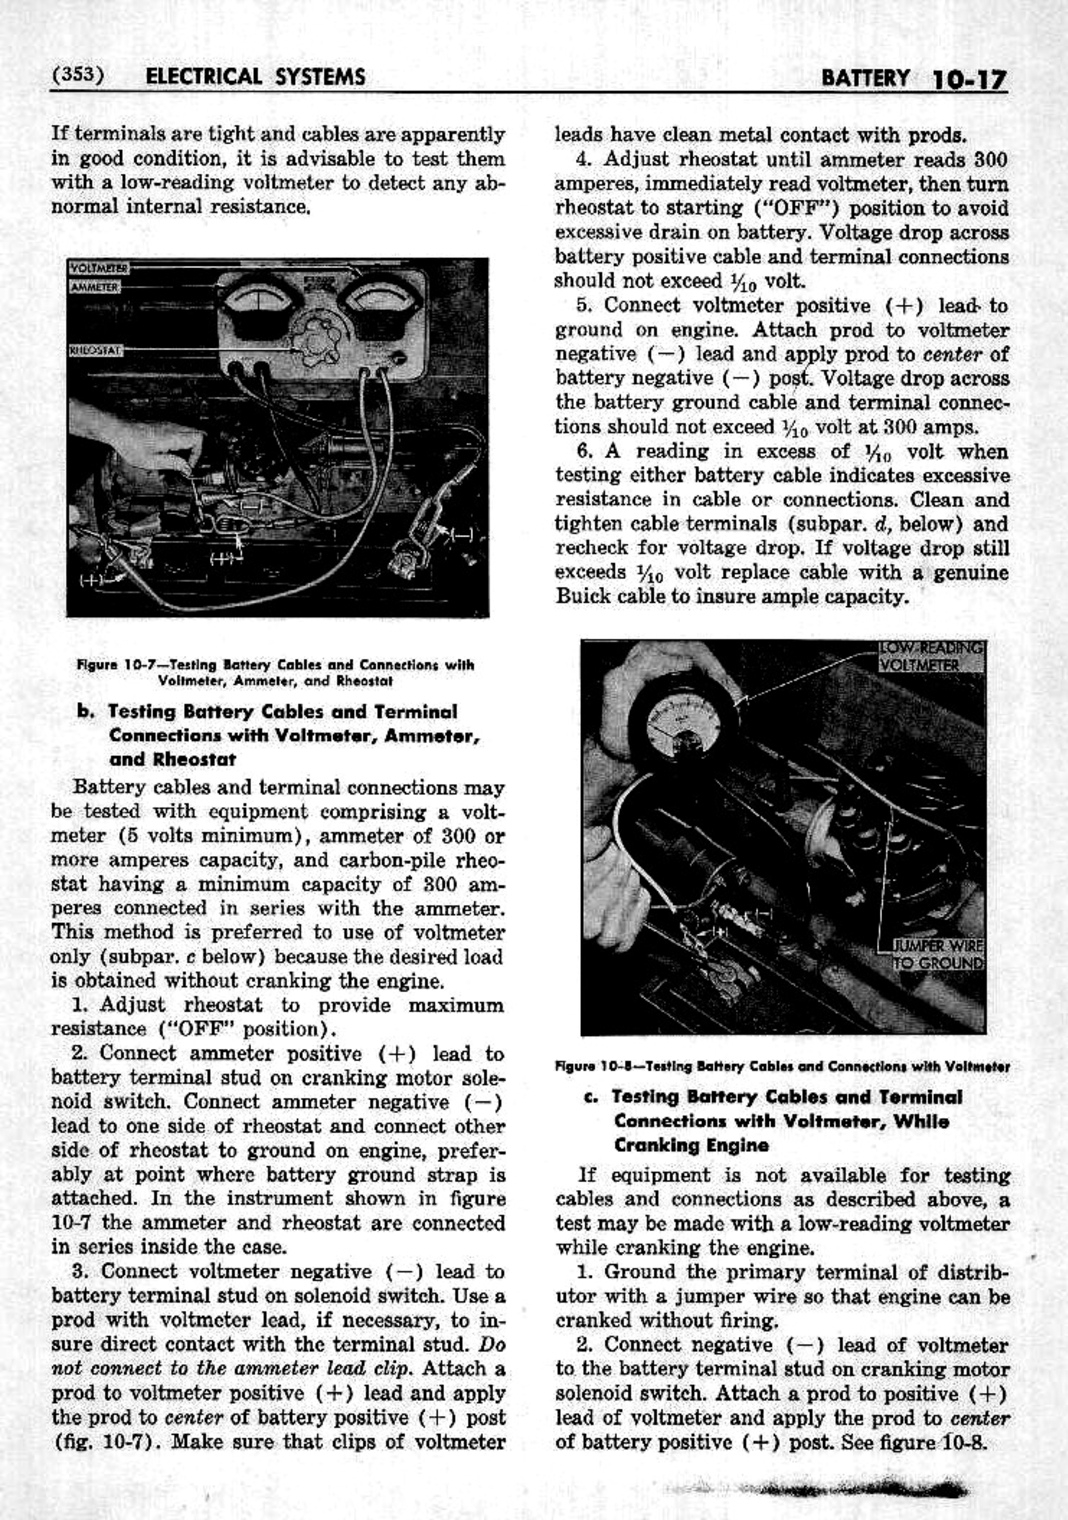 n_11 1952 Buick Shop Manual - Electrical Systems-017-017.jpg